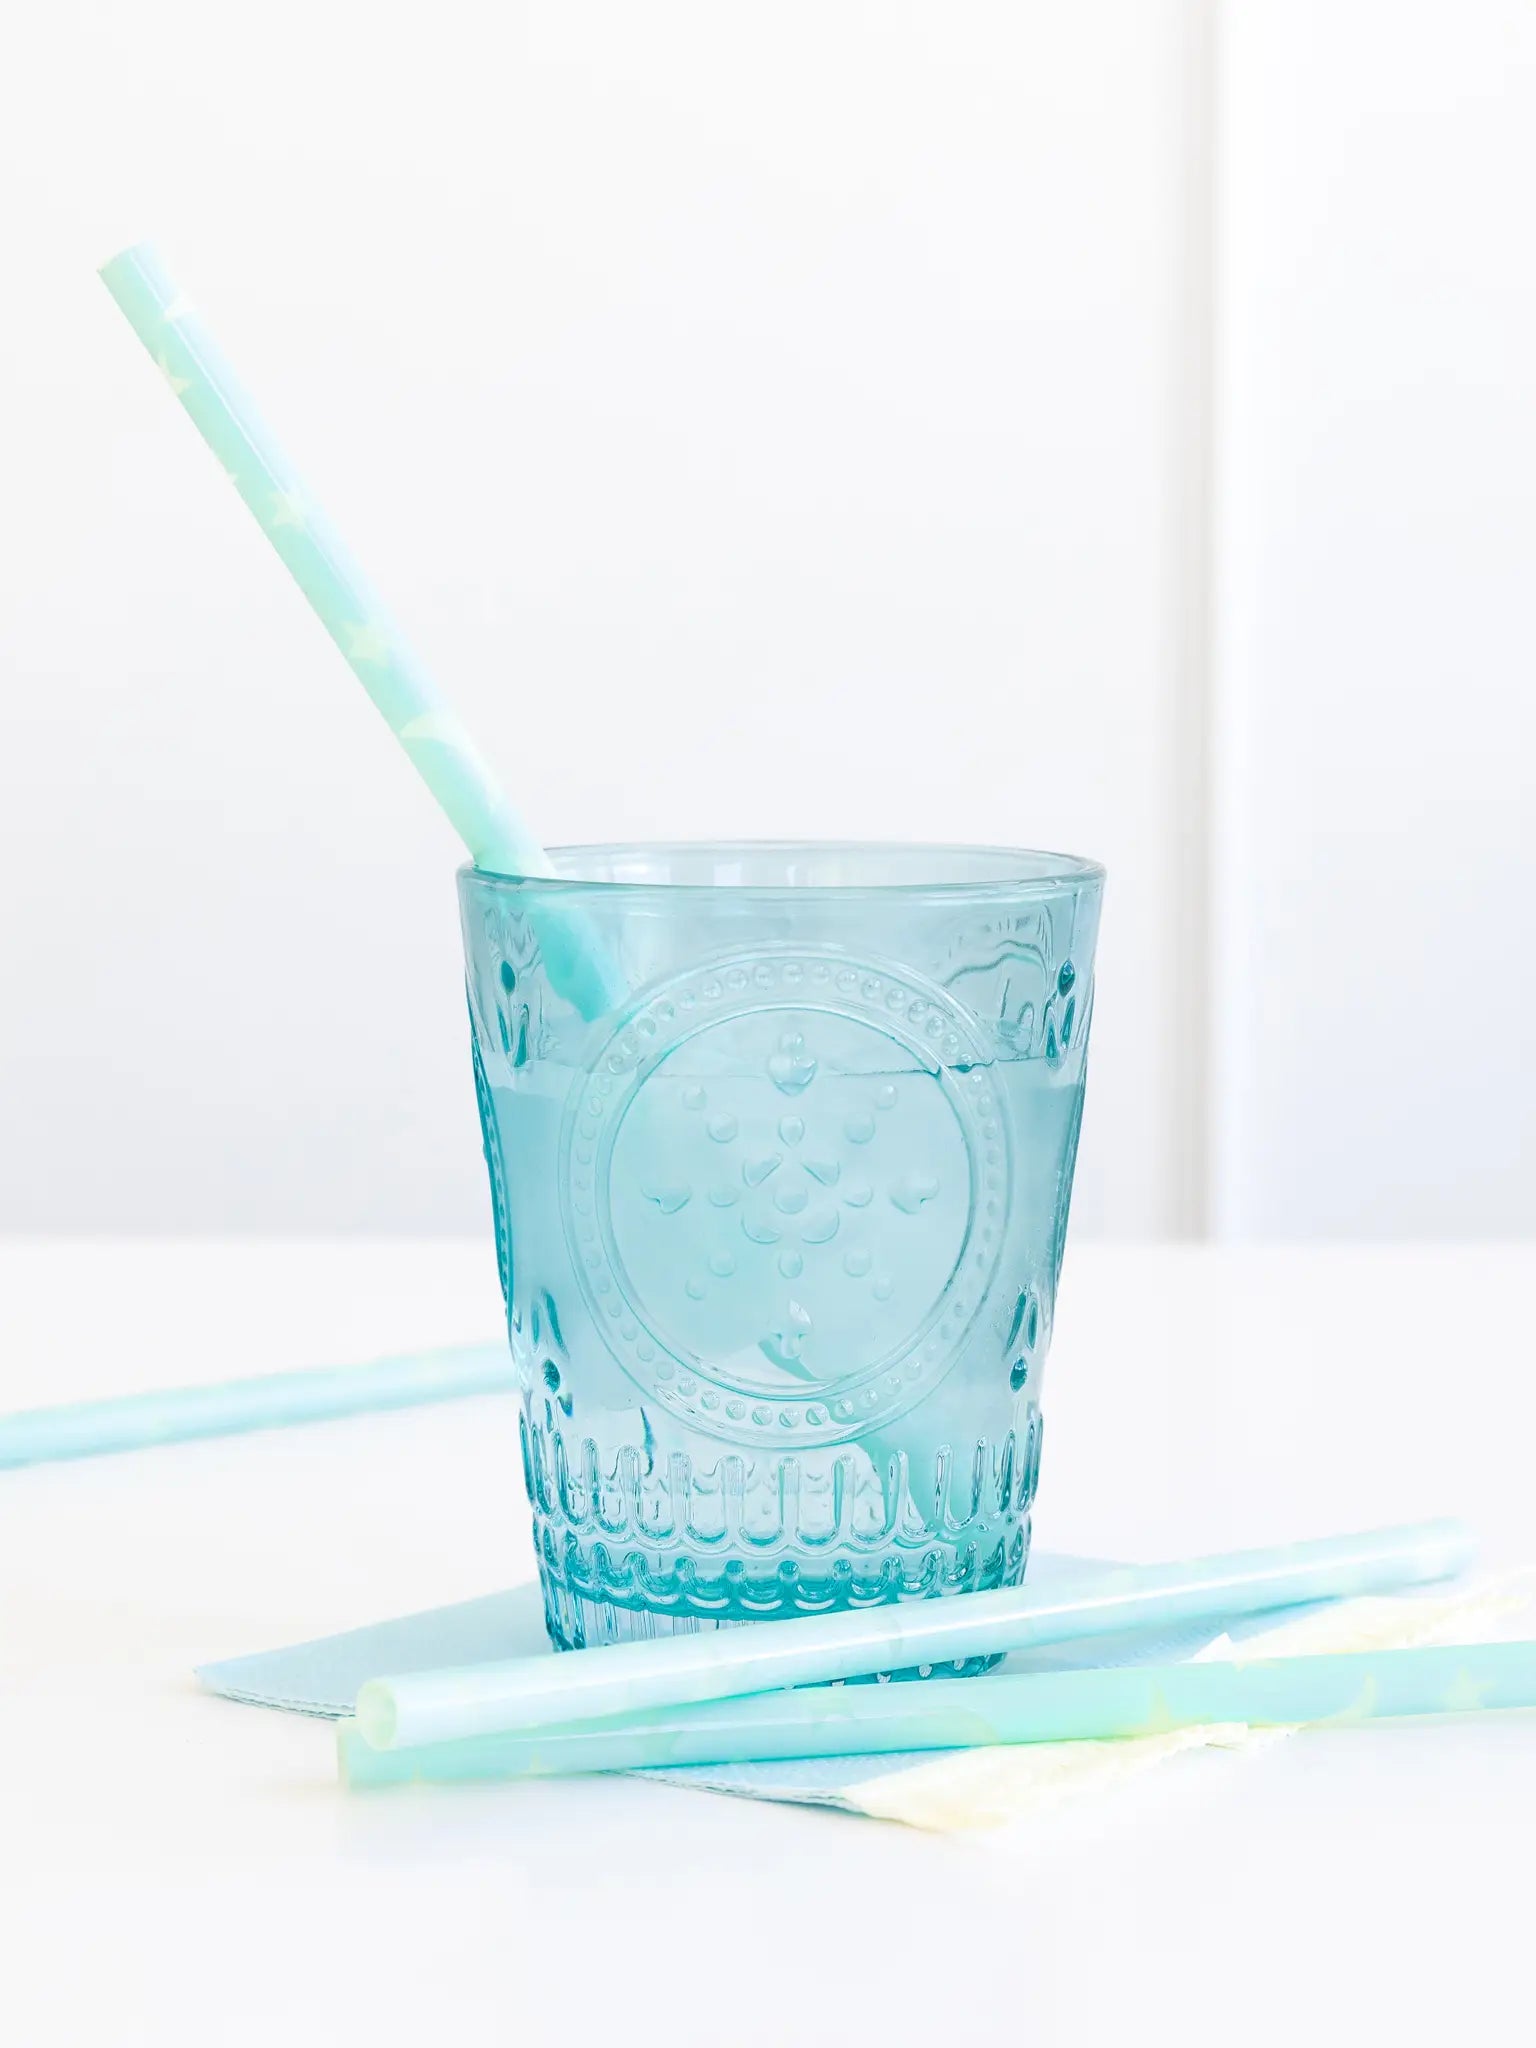 Baby Blue Reuseable Straws by My Mind’s Eye. Baby Shower Straws. Boy Baby Shower Straws. Blue Baby Shower Straws. Baby Shower Decor.